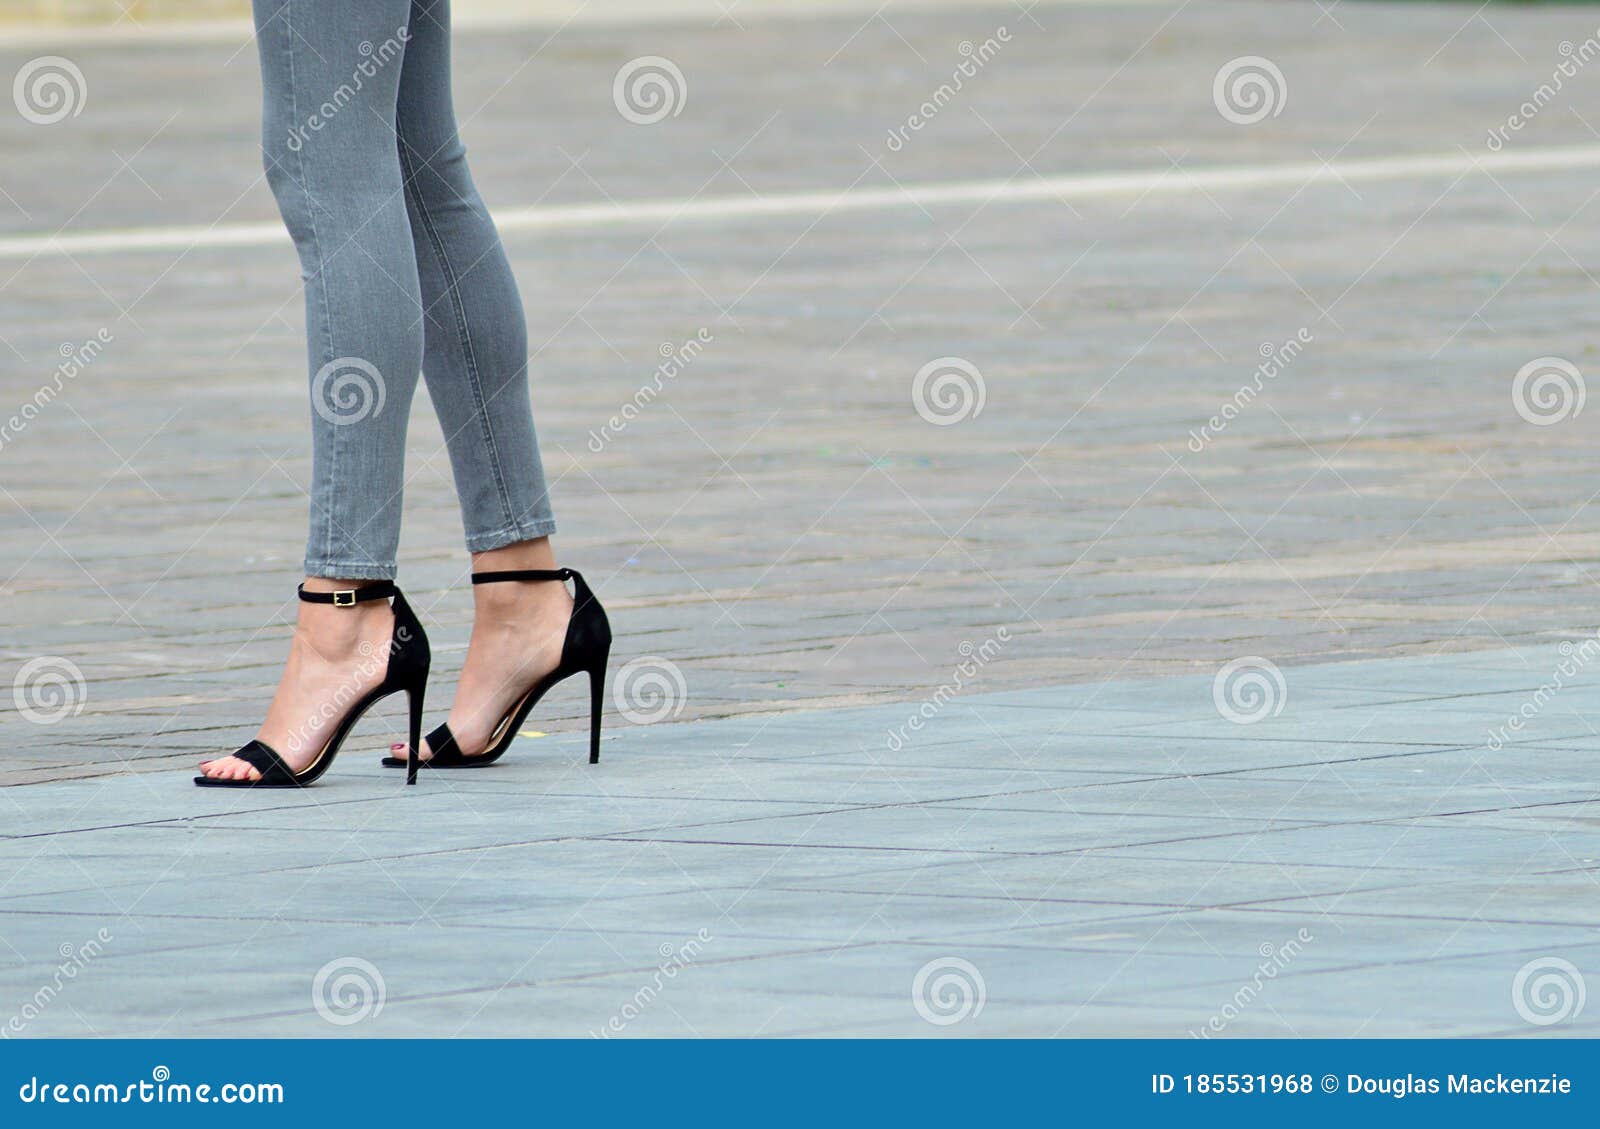 What color high heels match with blue or black jeans? - Quora